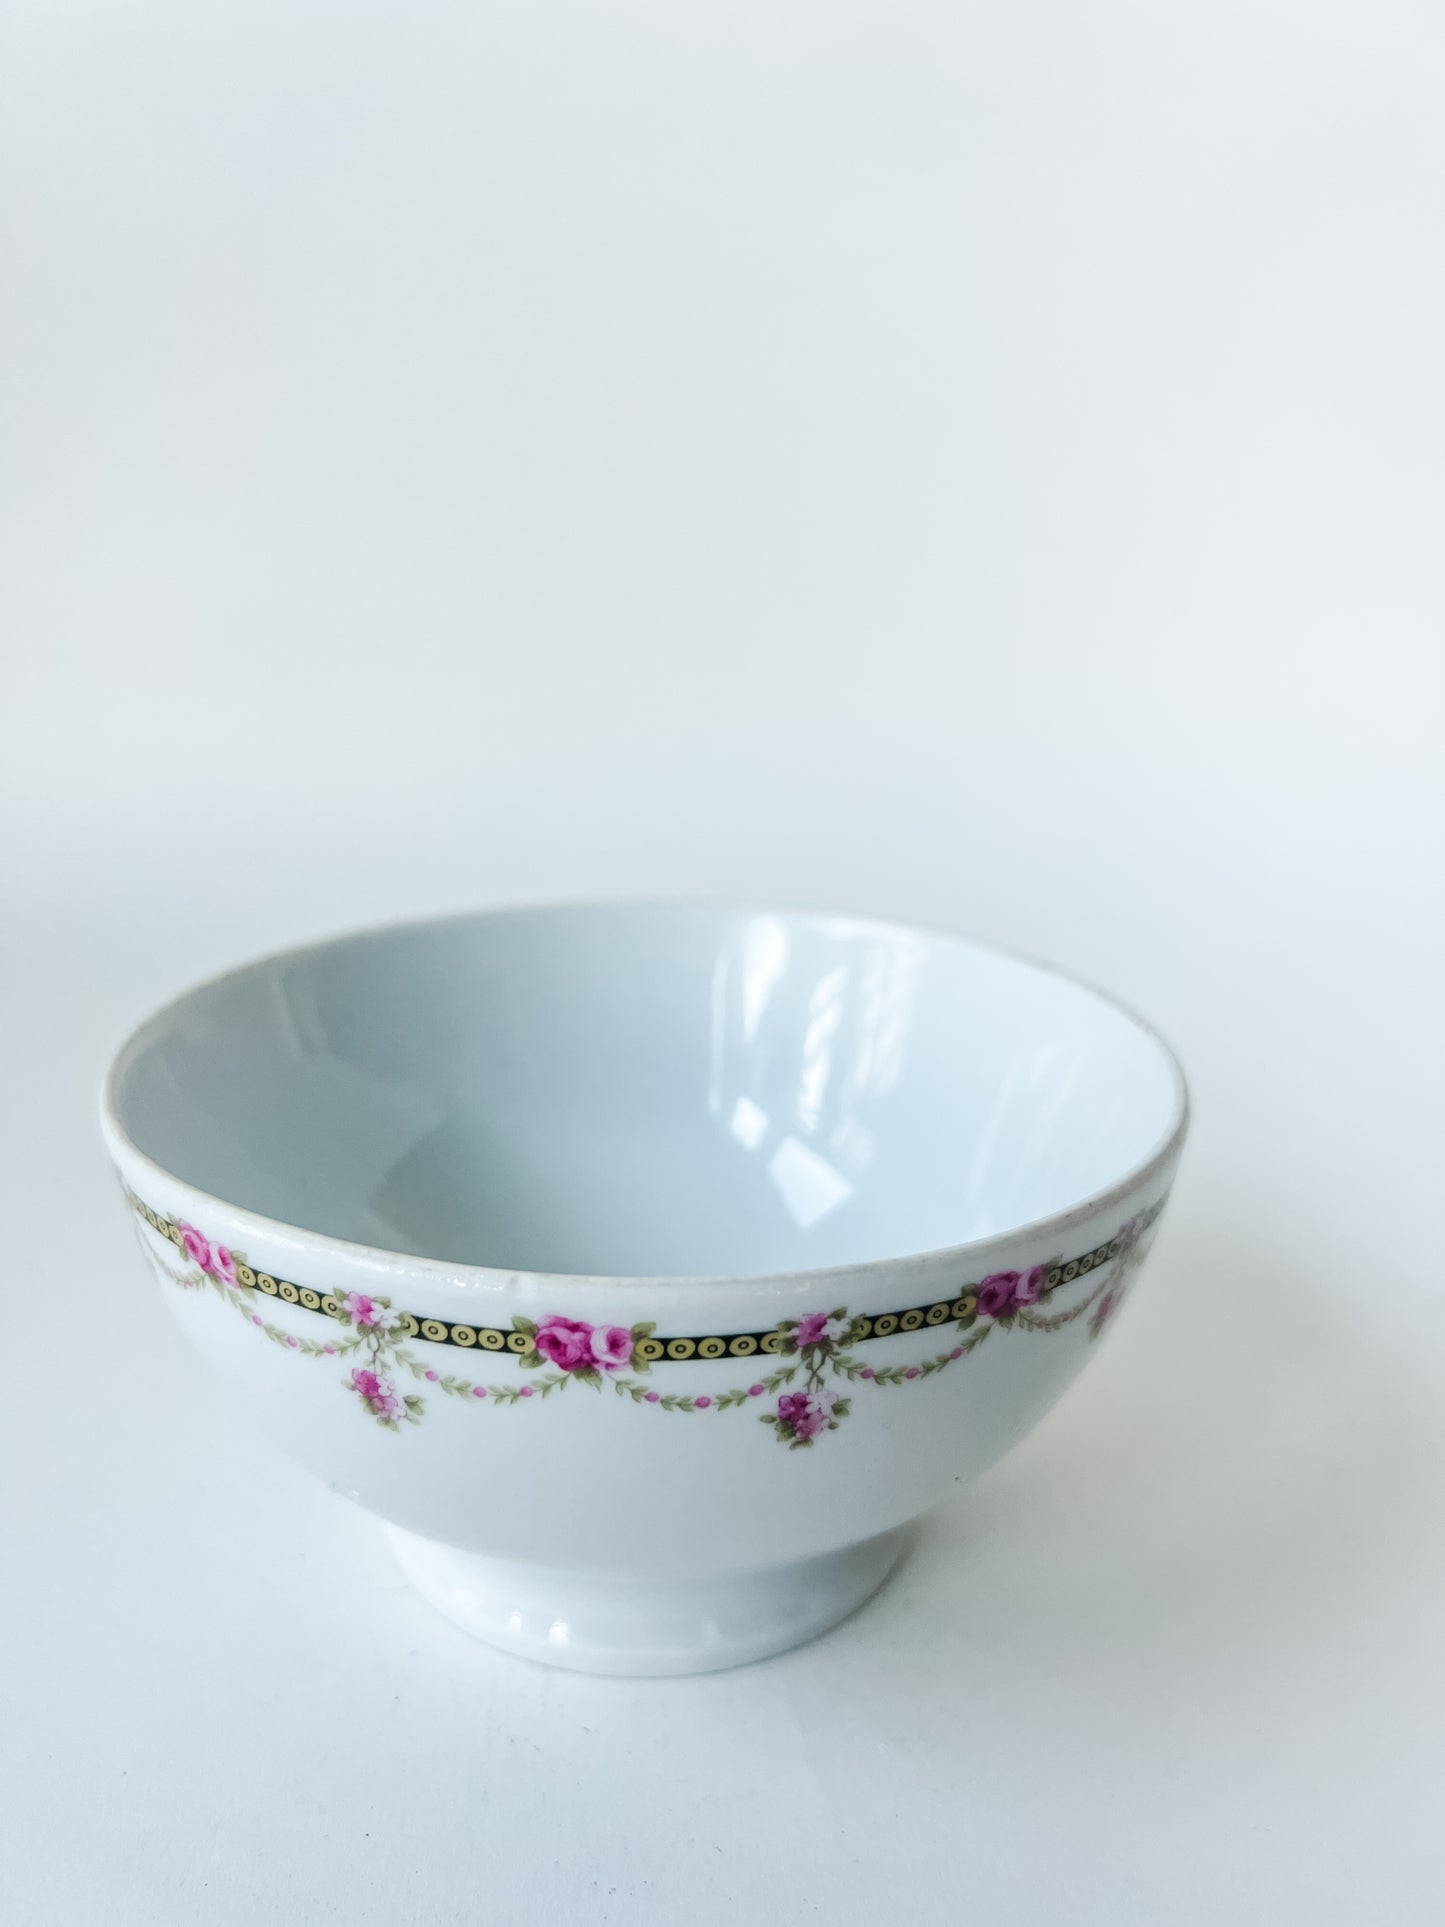 French Cafe Au Lait Bowl With Pink Flowers on the Rim